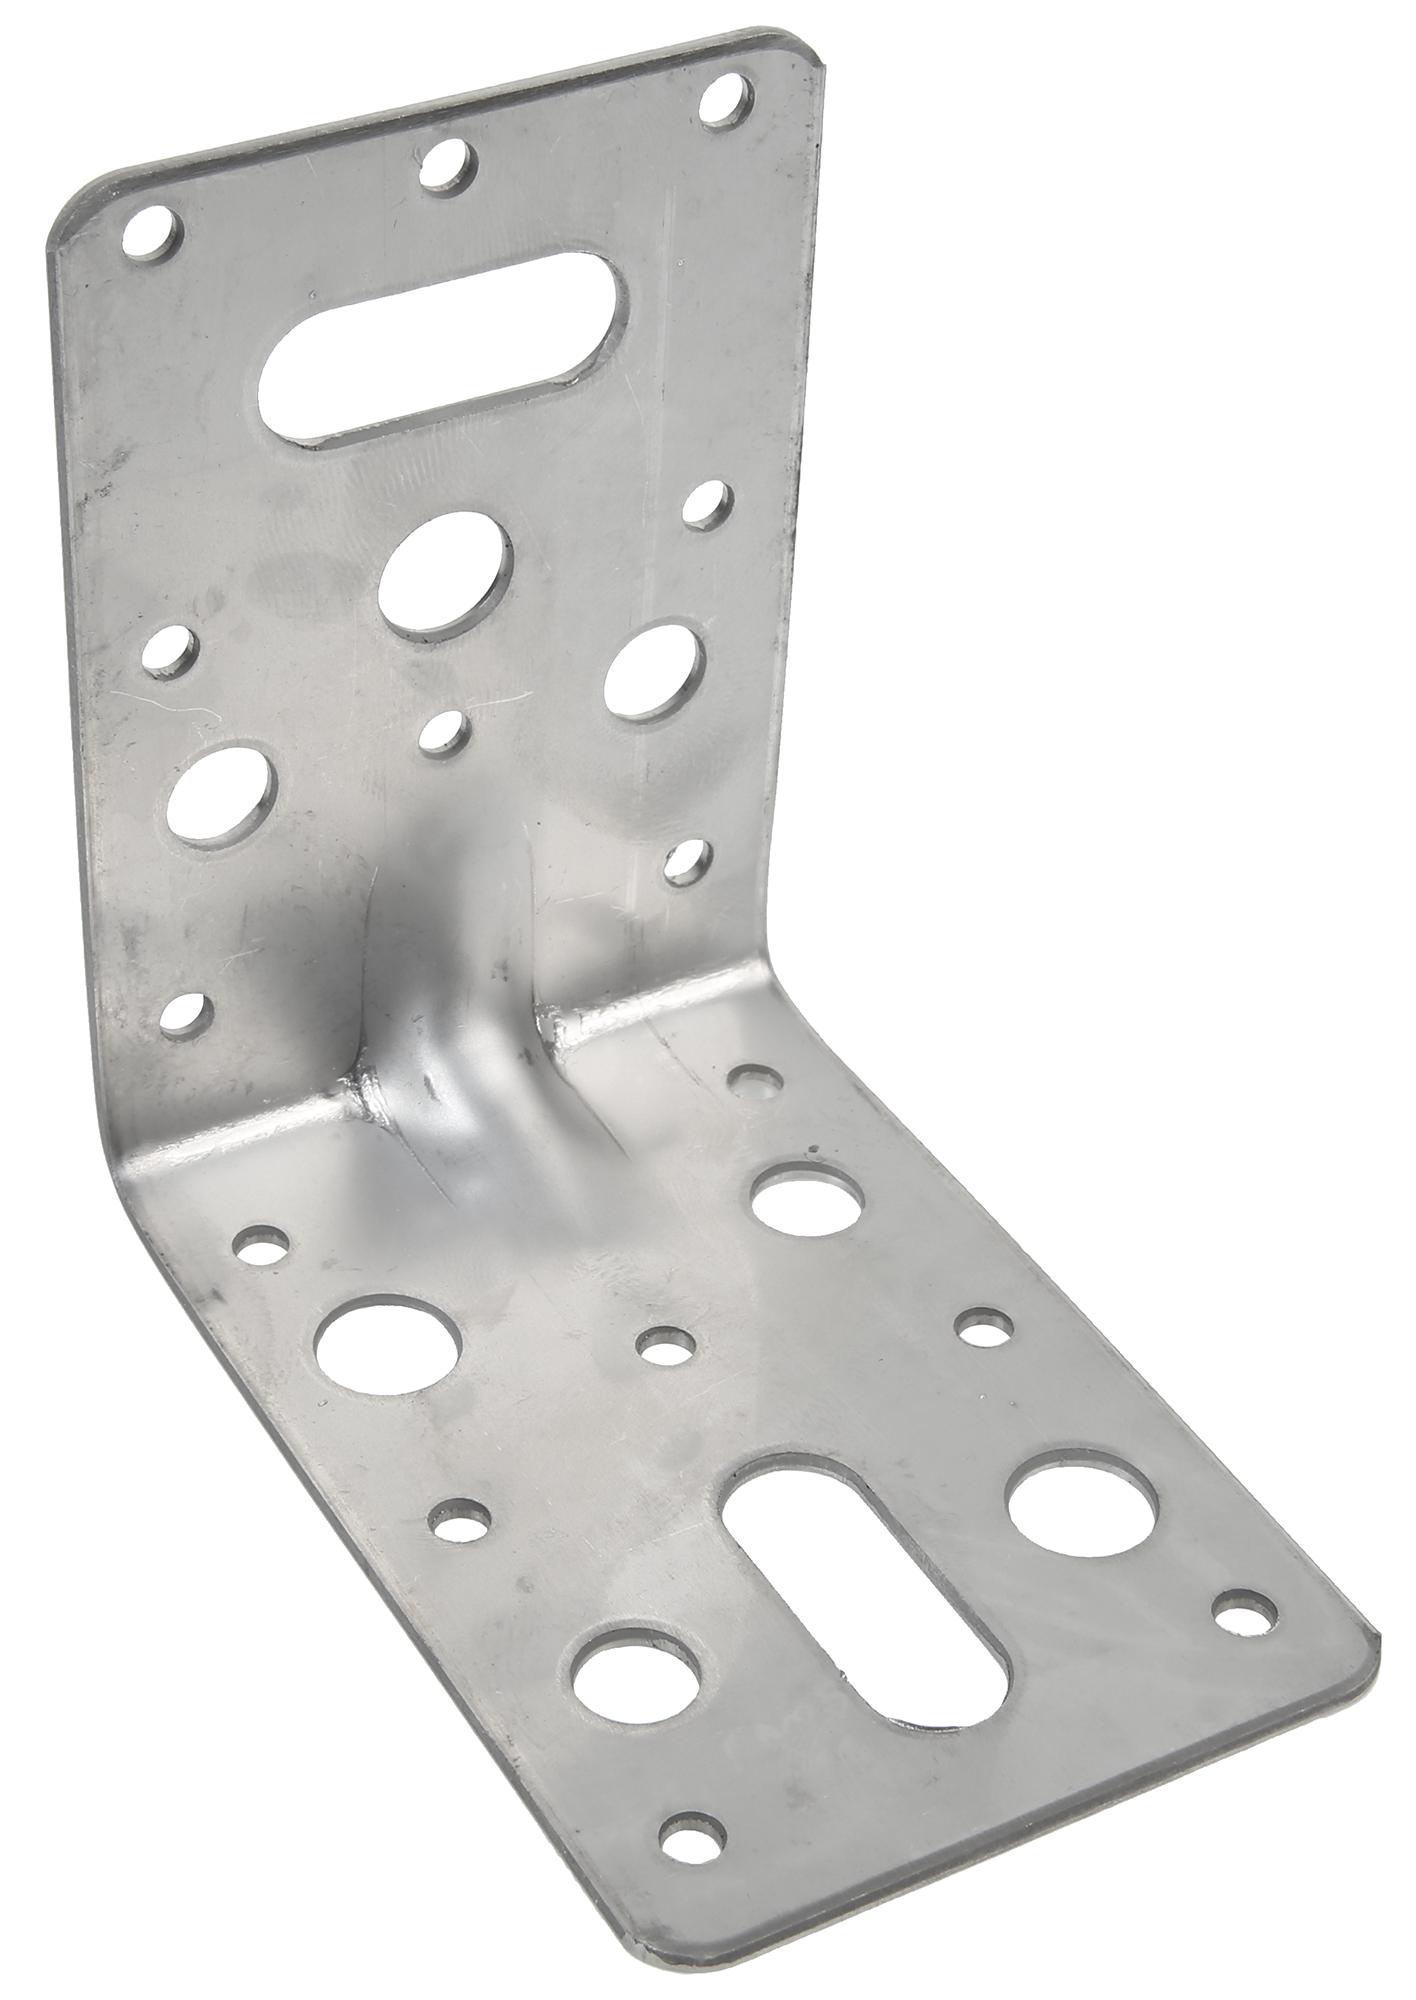 Timco 9090Abs Angle Bracket Stainless S - 90X90mm